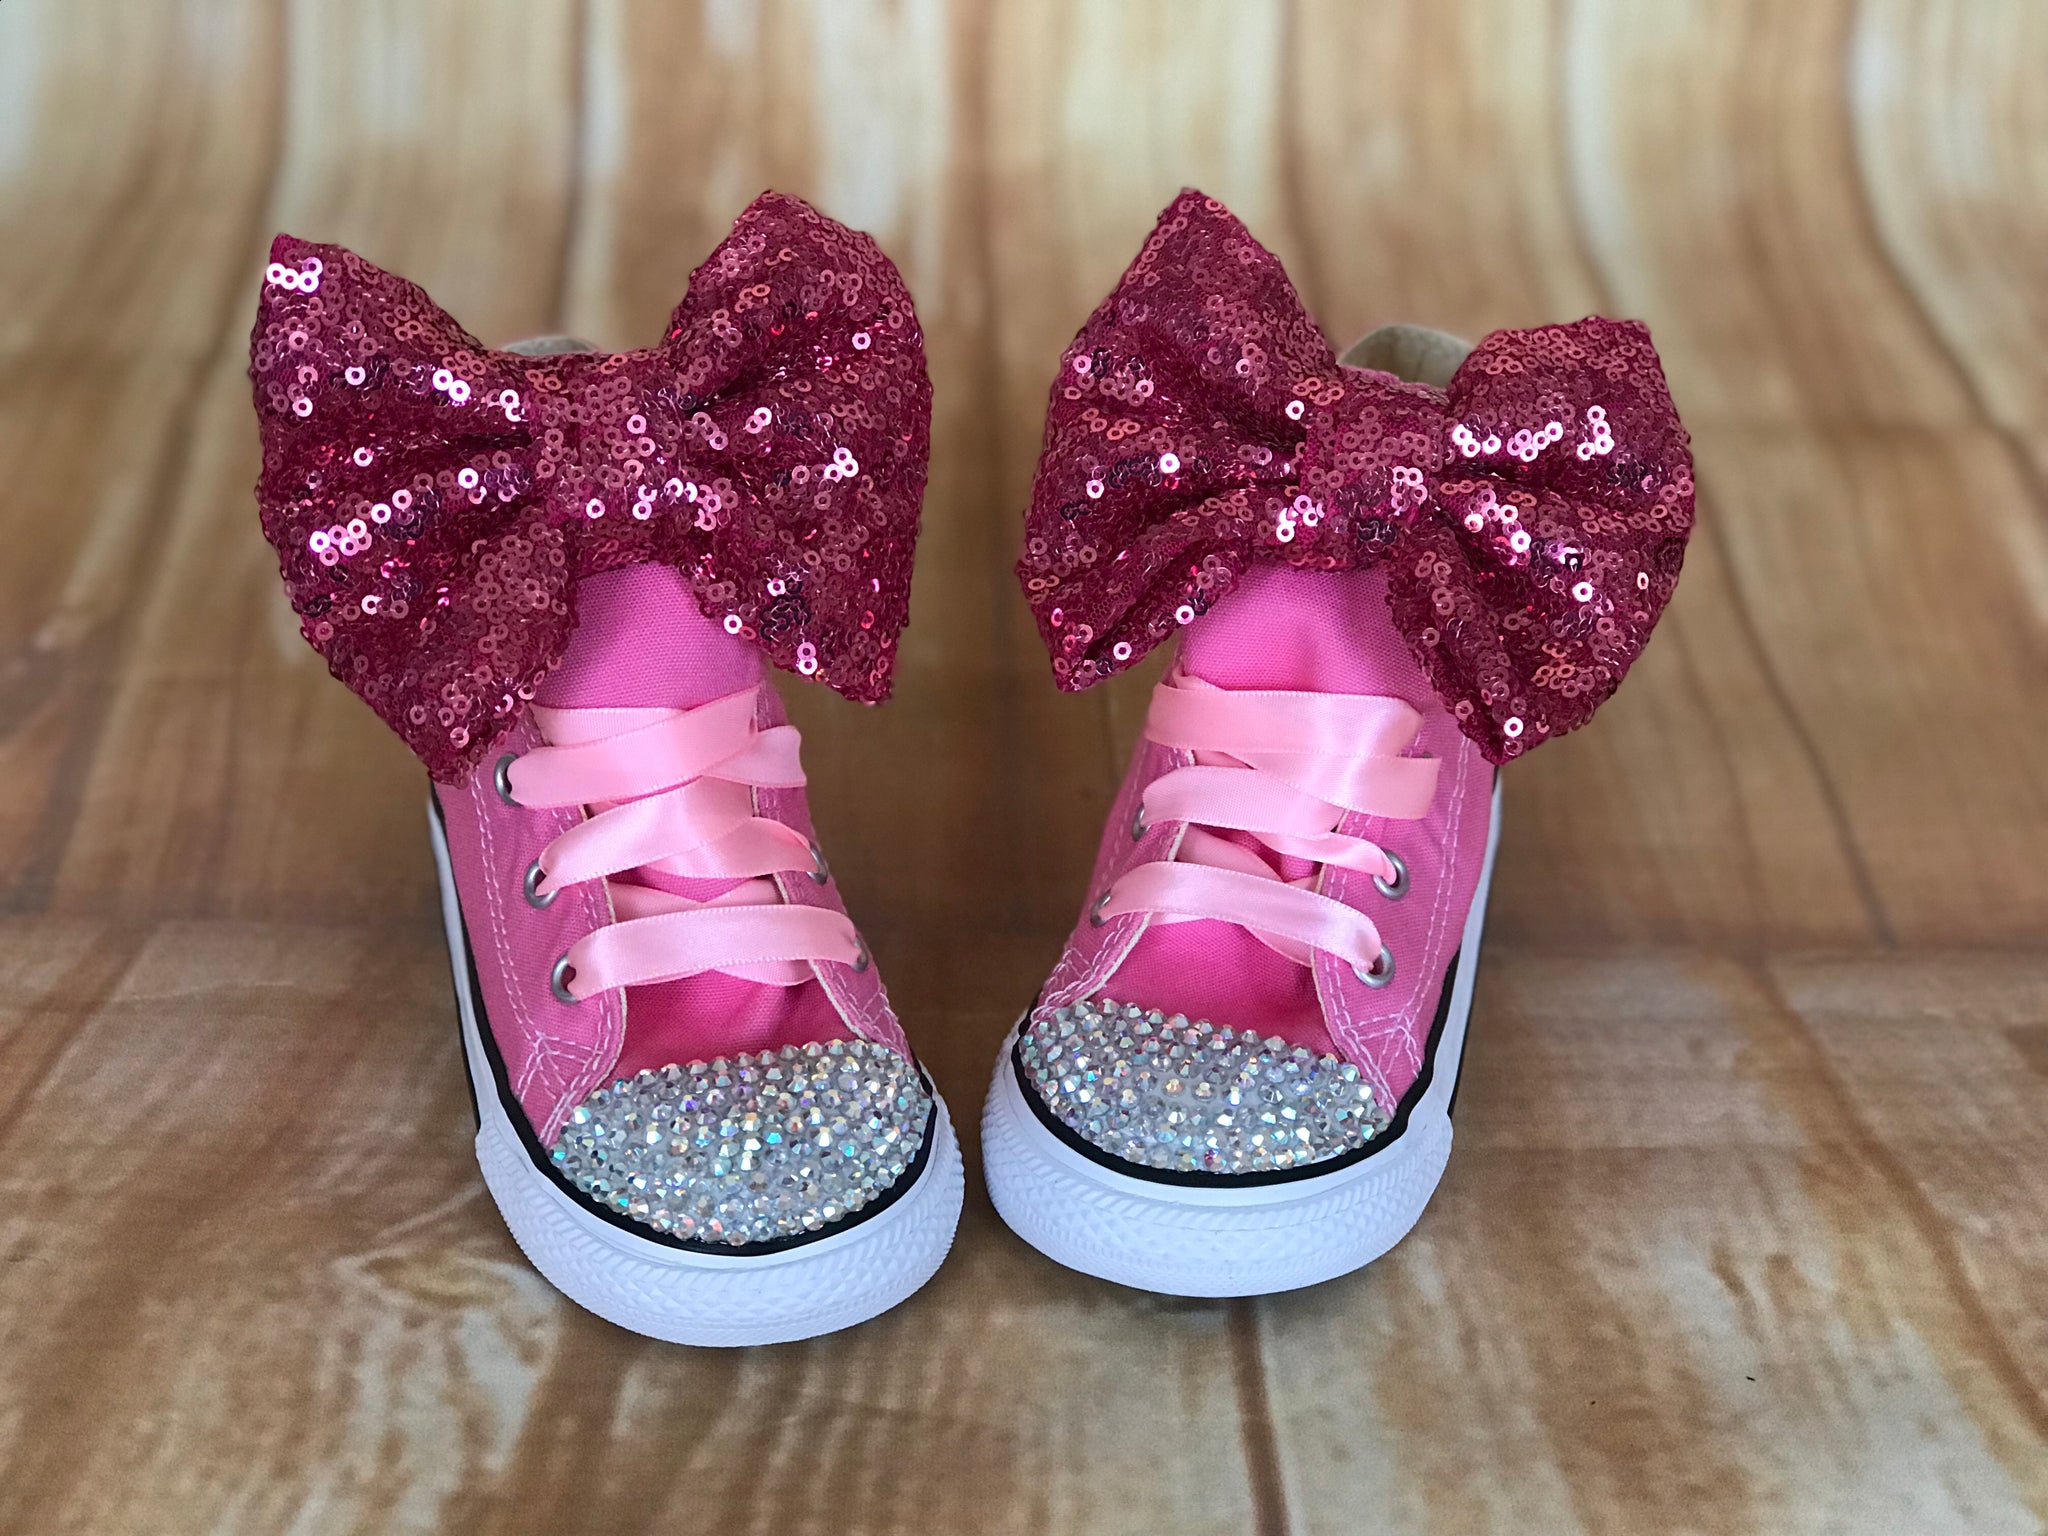 Red Touch of Bling Converse Sneakers, Little Kids Shoe Size 10-2